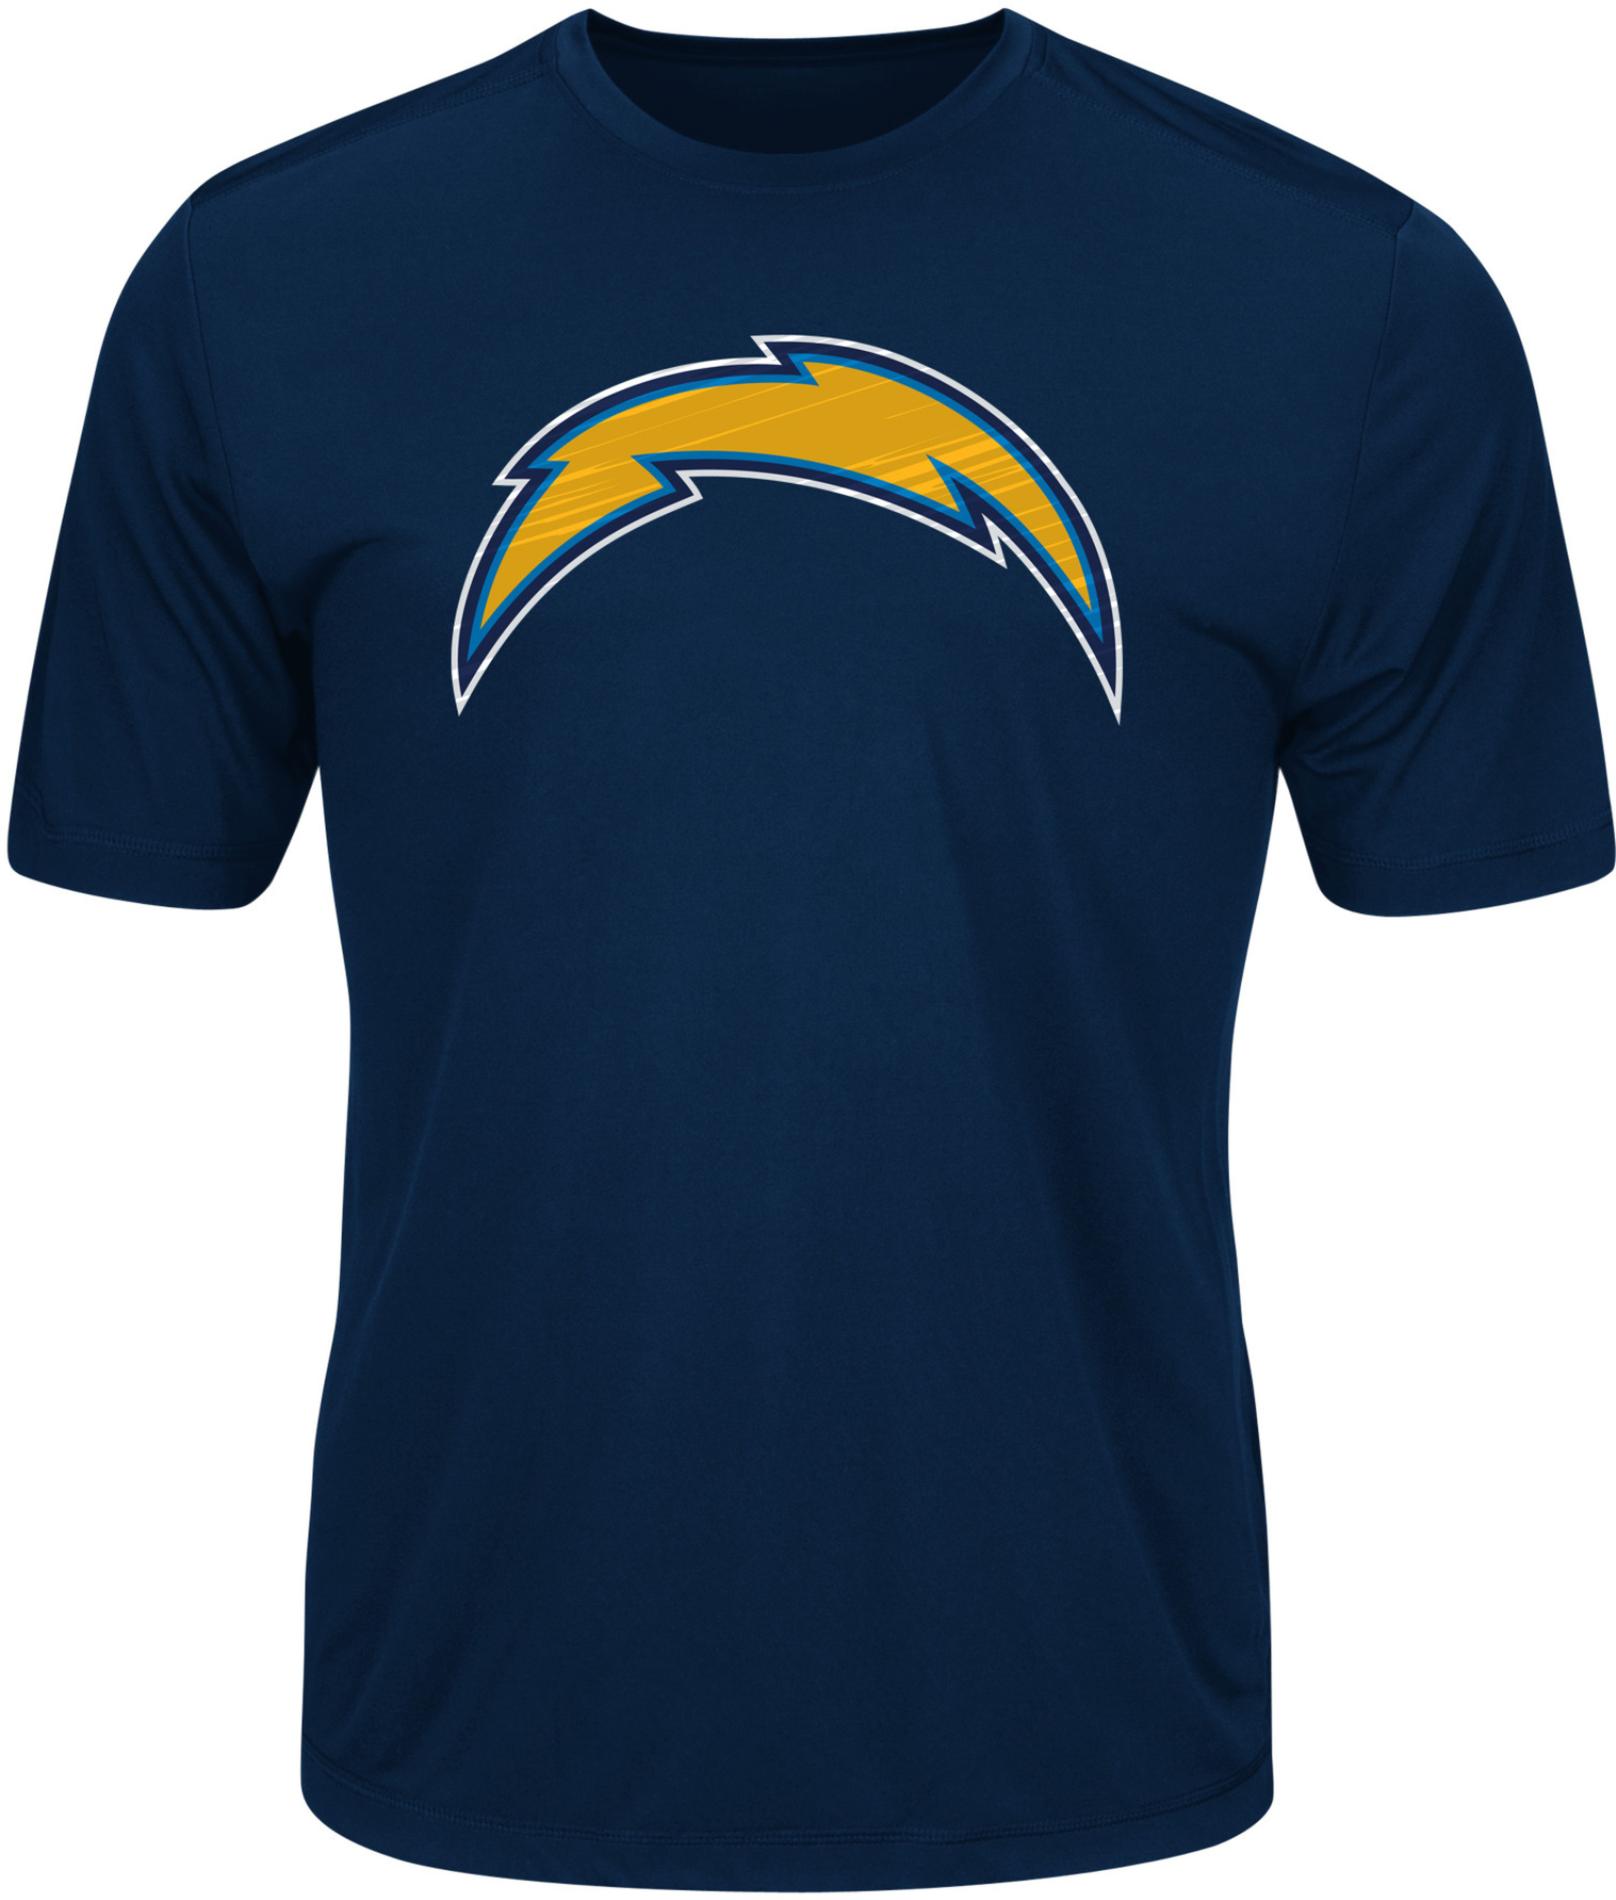 NFL Men's Graphic T-Shirt - San Diego Chargers